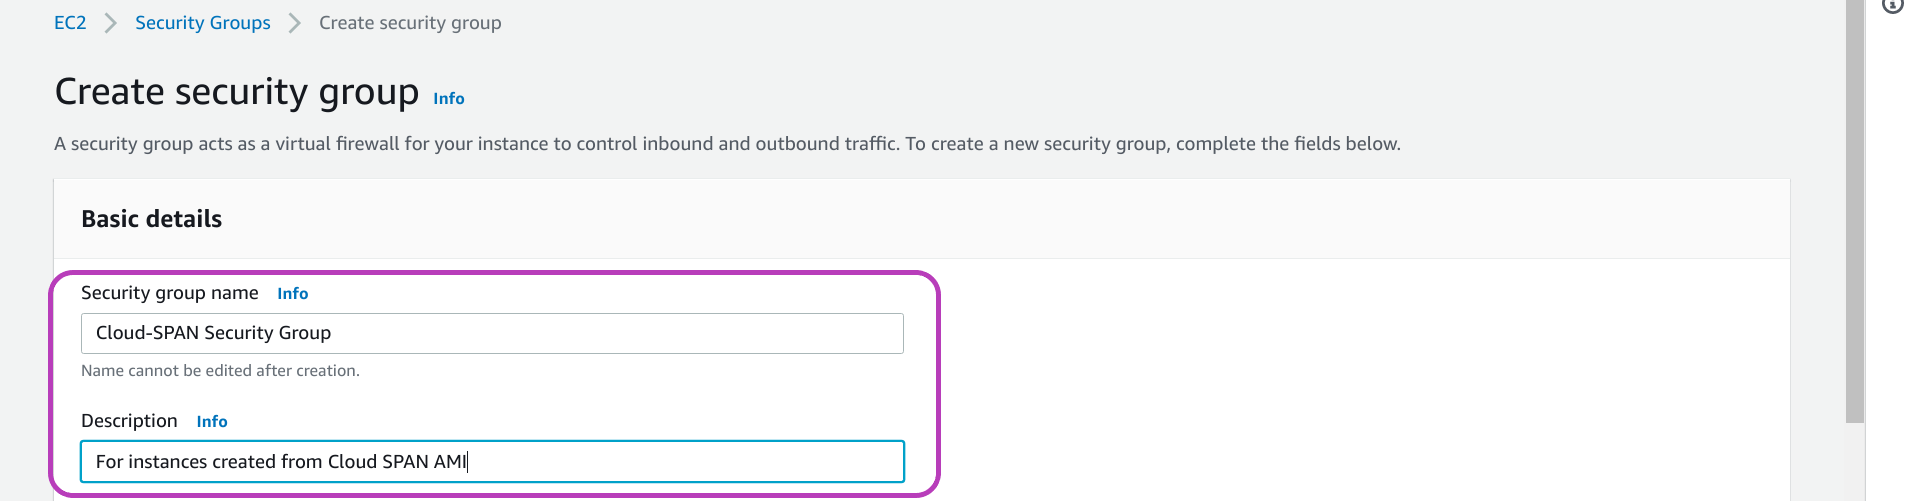 Screenshot of AWS Console "Create security group" page in a browser with options "Security group name" and Description circled.